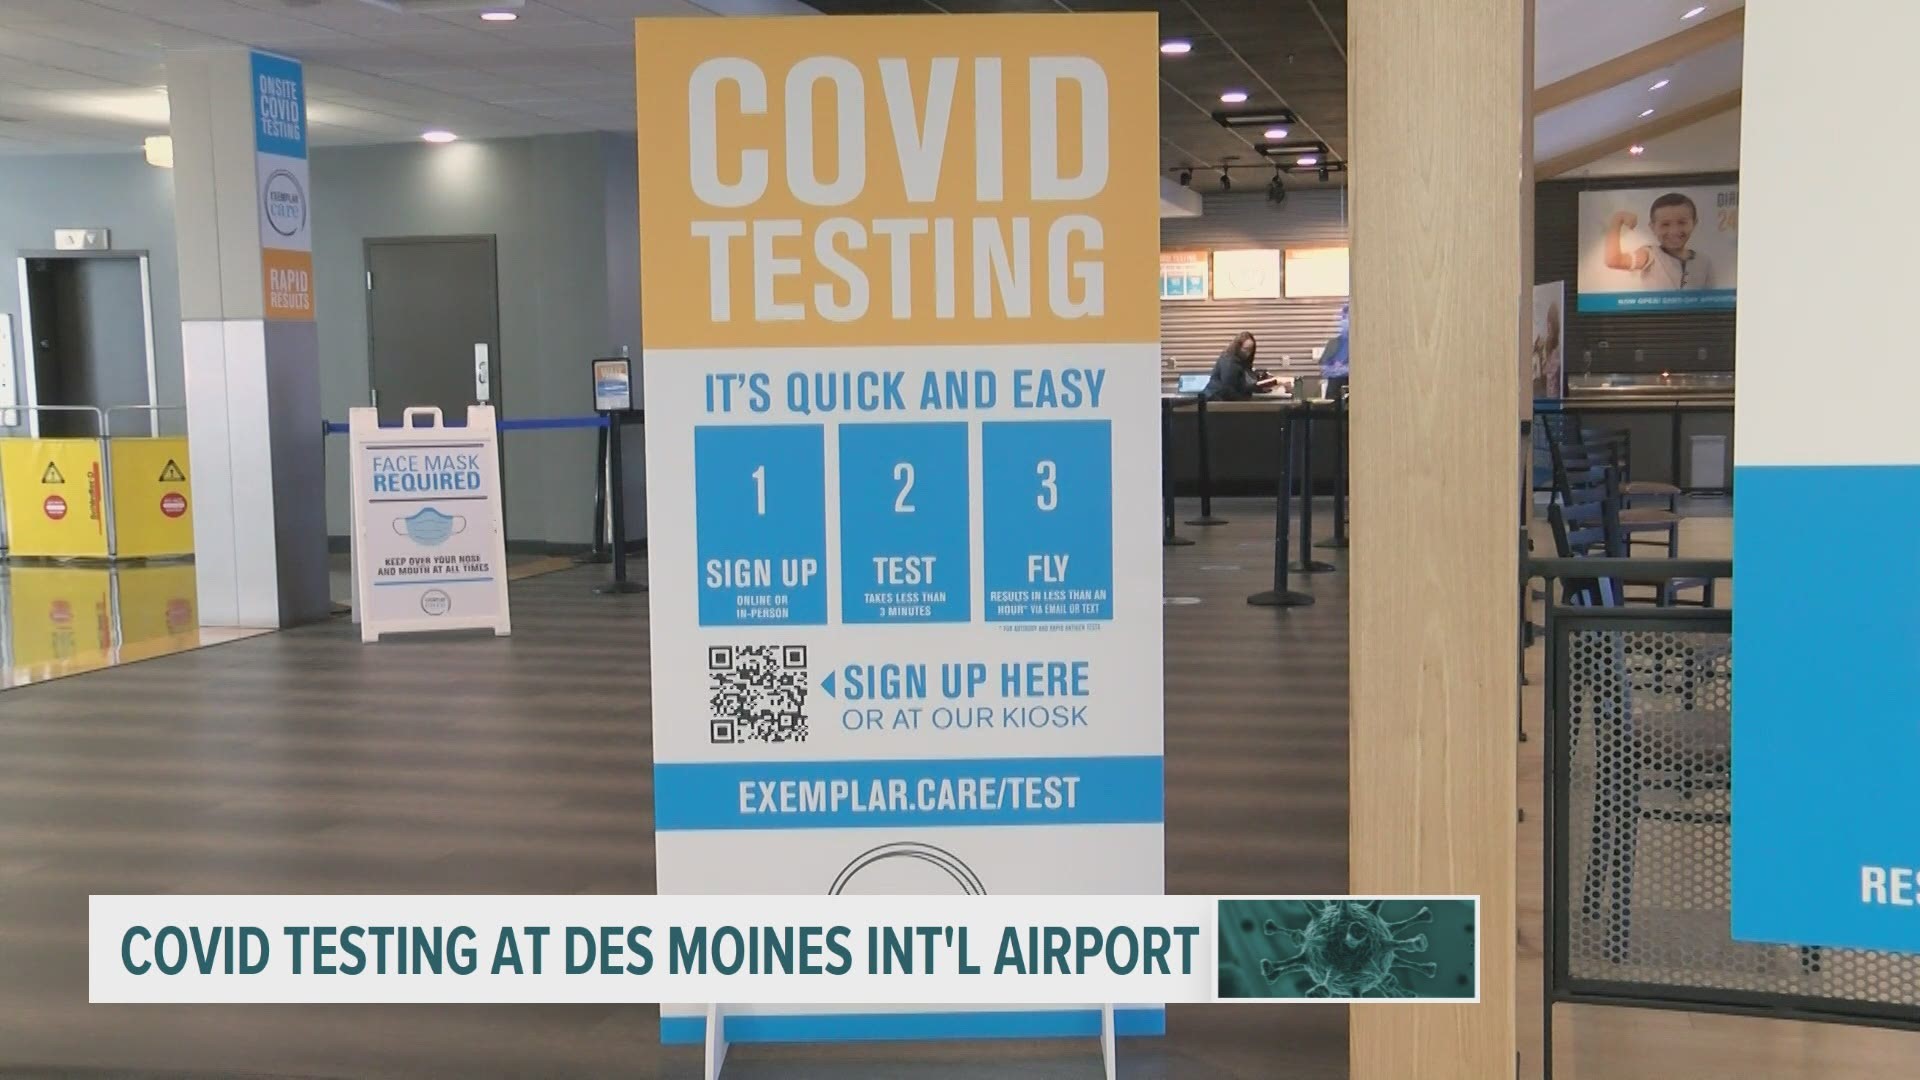 The Des Moines Airport Authority has partnered with Exemplar Care to provide travelers the convenience of on-site COVID-19 testing.